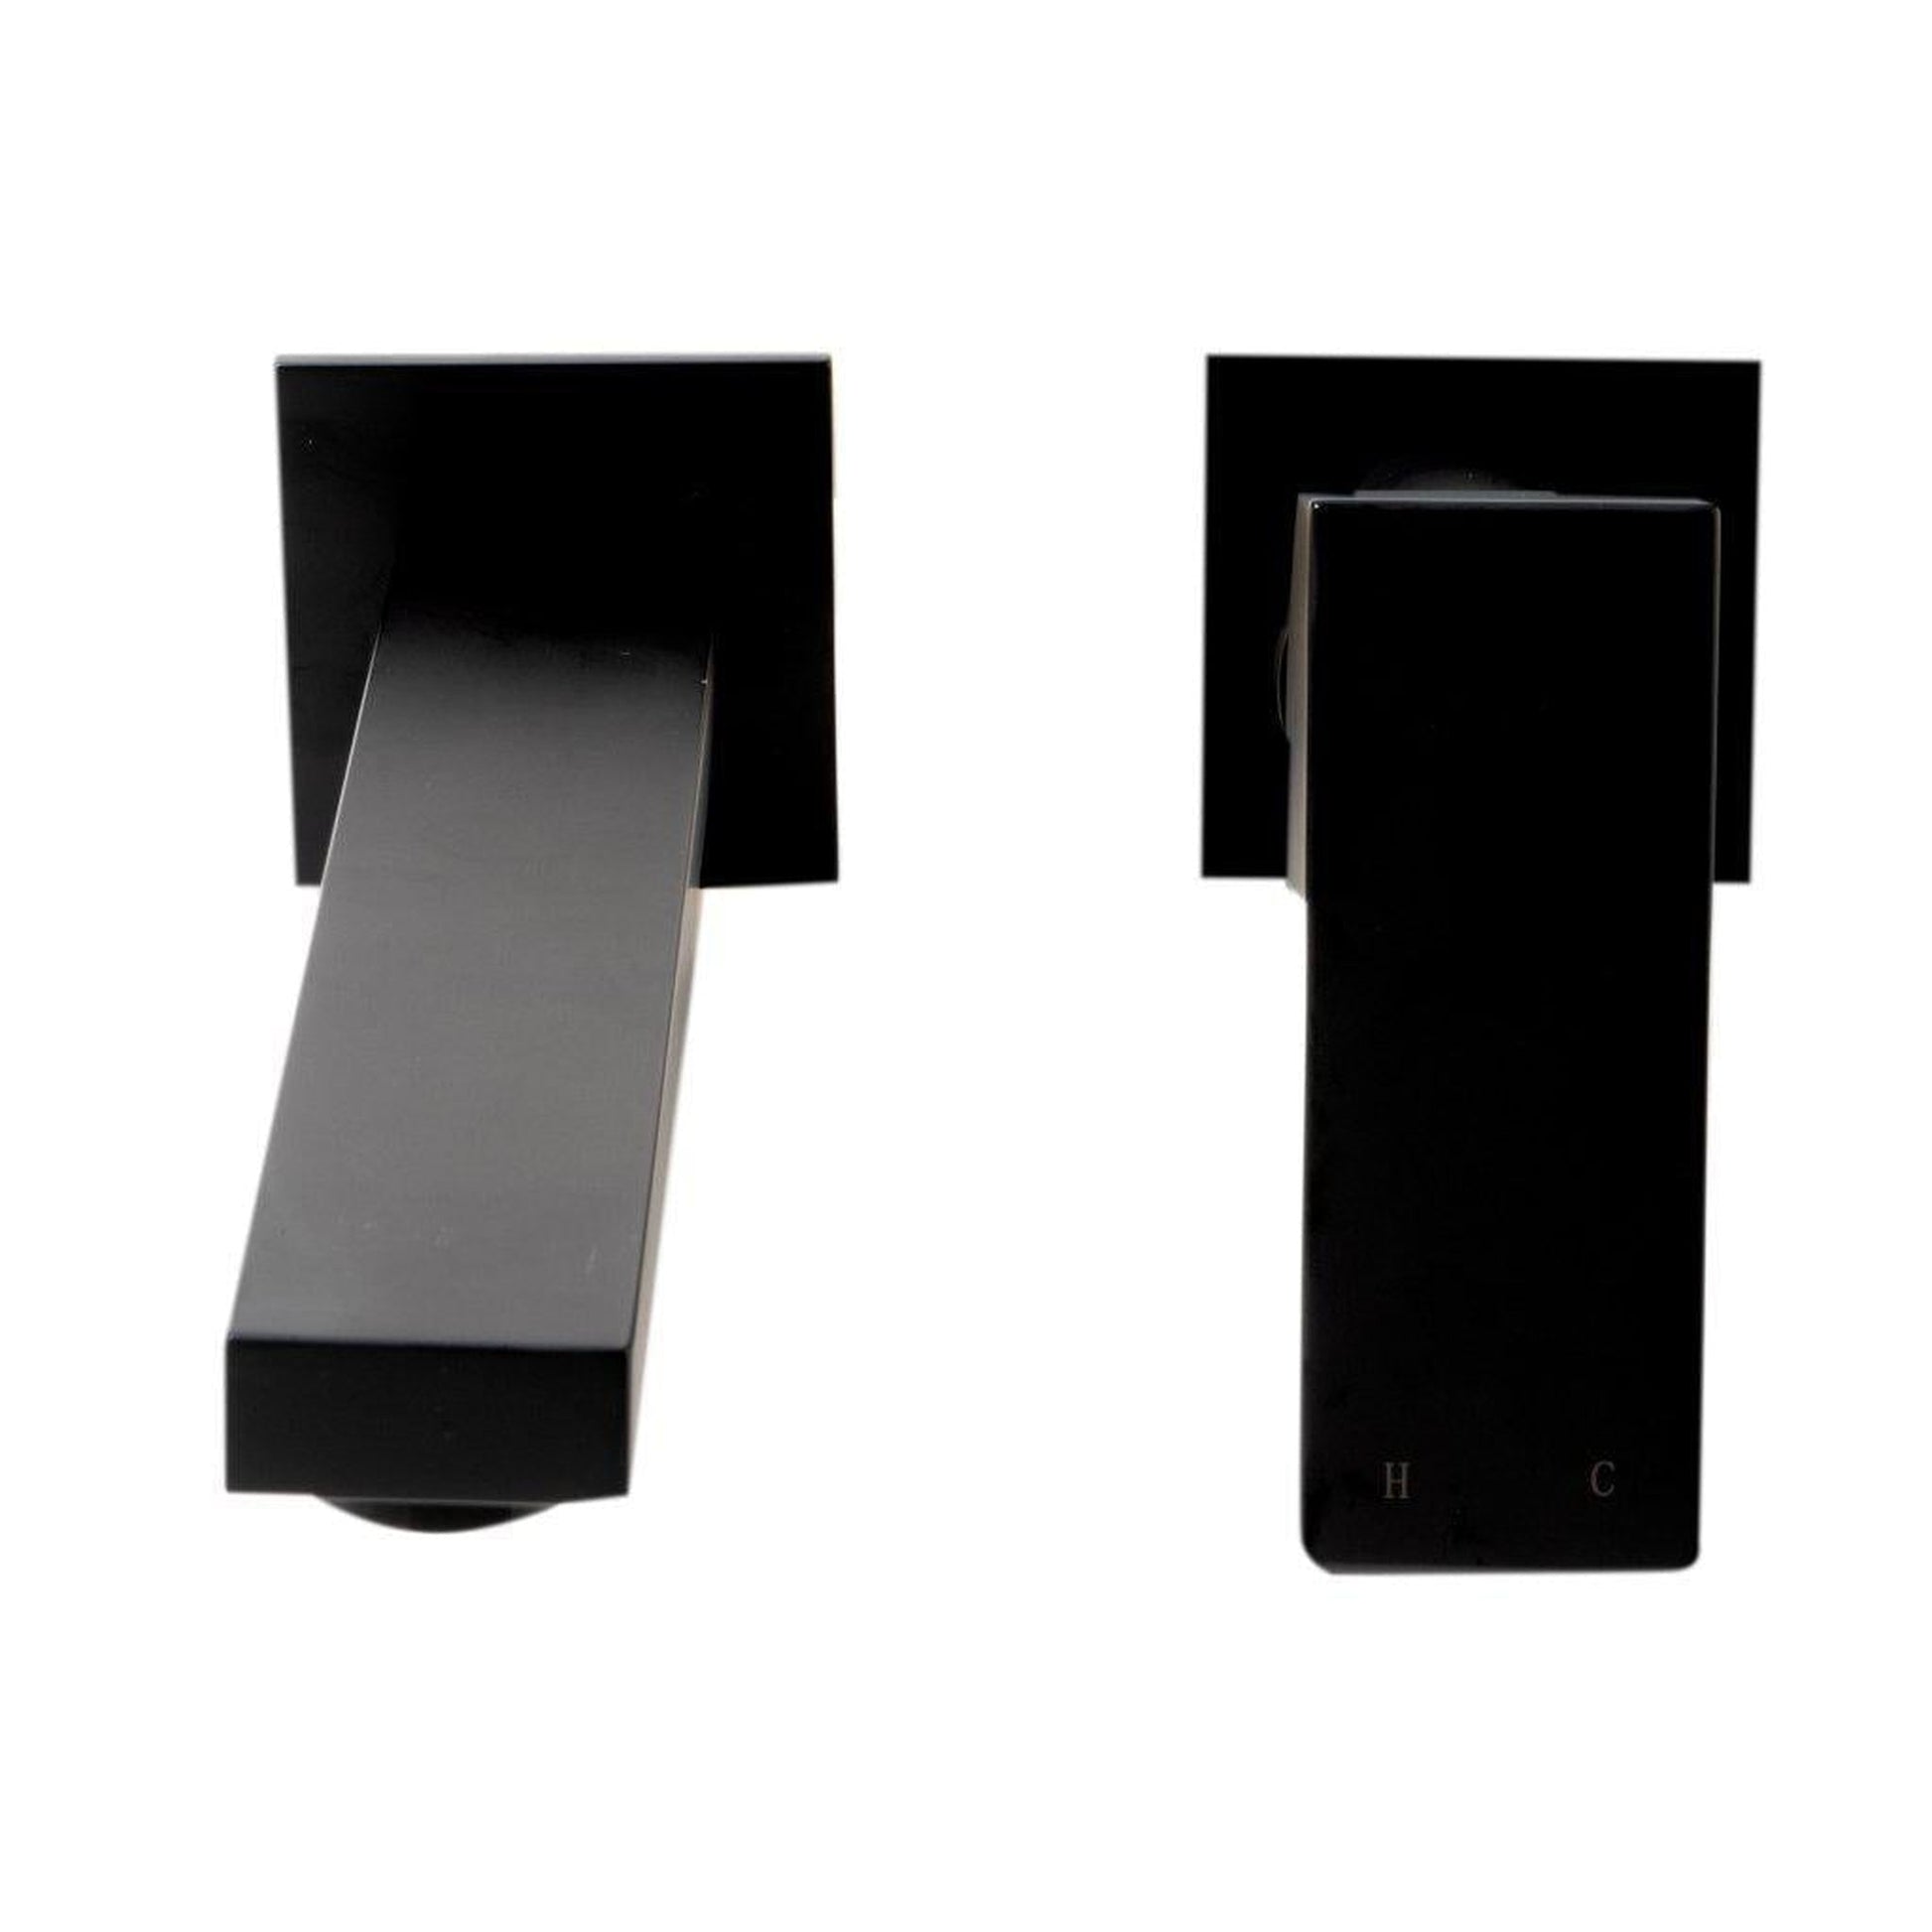 ALFI Brand AB1468-BM Black Matte Wall-Mounted Square Spout Brass Bathroom Sink Faucet With Single Lever